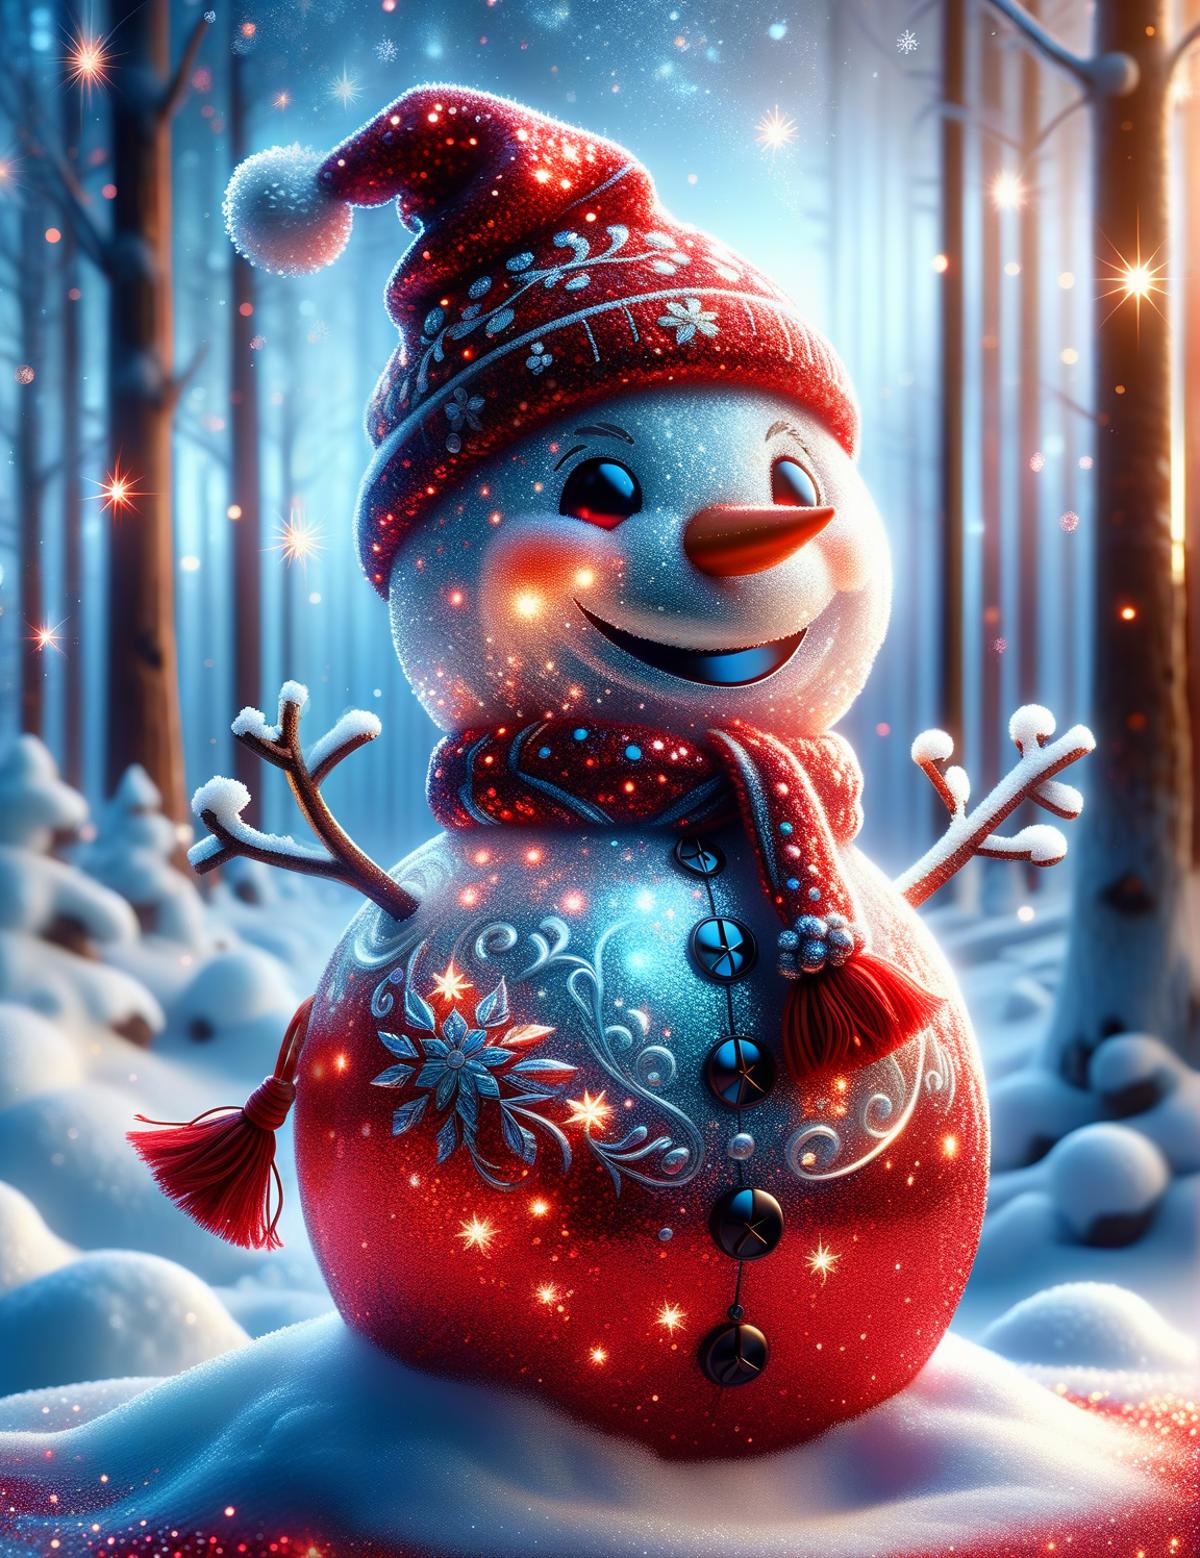 A Snowman with a red hat, scarf, and a big smile.